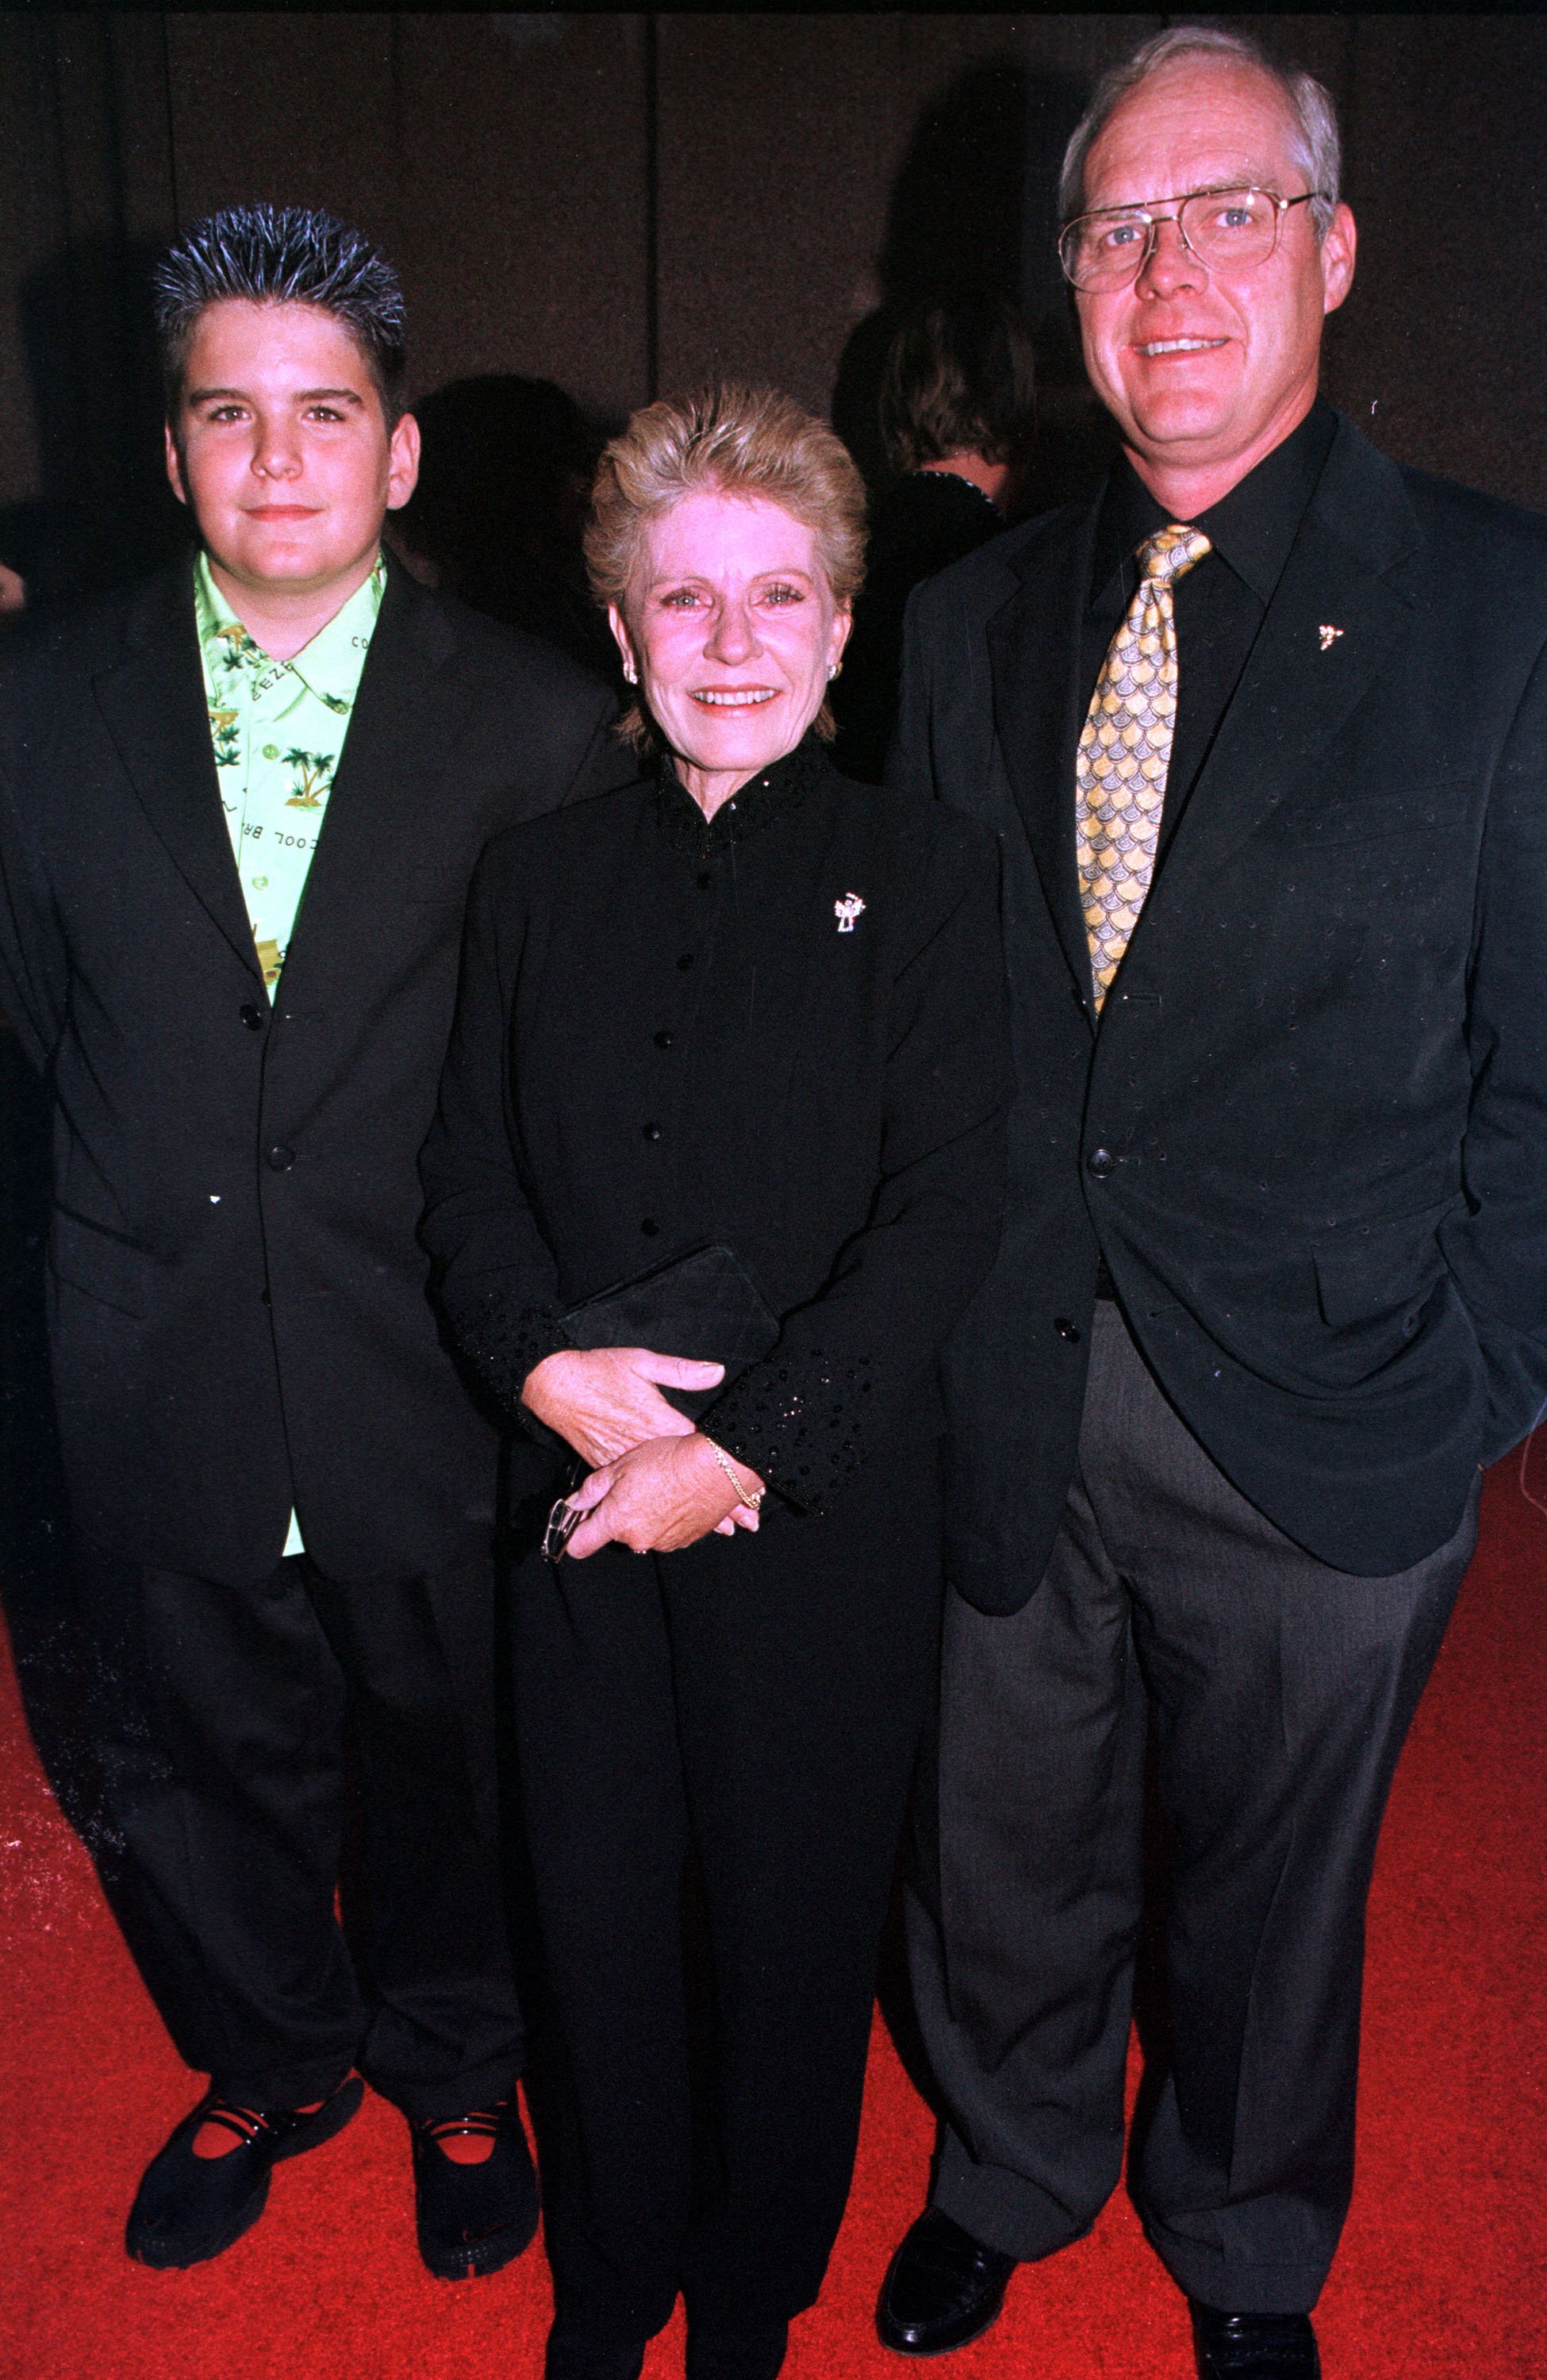 Patty Duke, her husband and her son arrive for the Michael Jackson concert at Madison Square Garden on September 7, 2001 in New York City. | Source: Getty Images